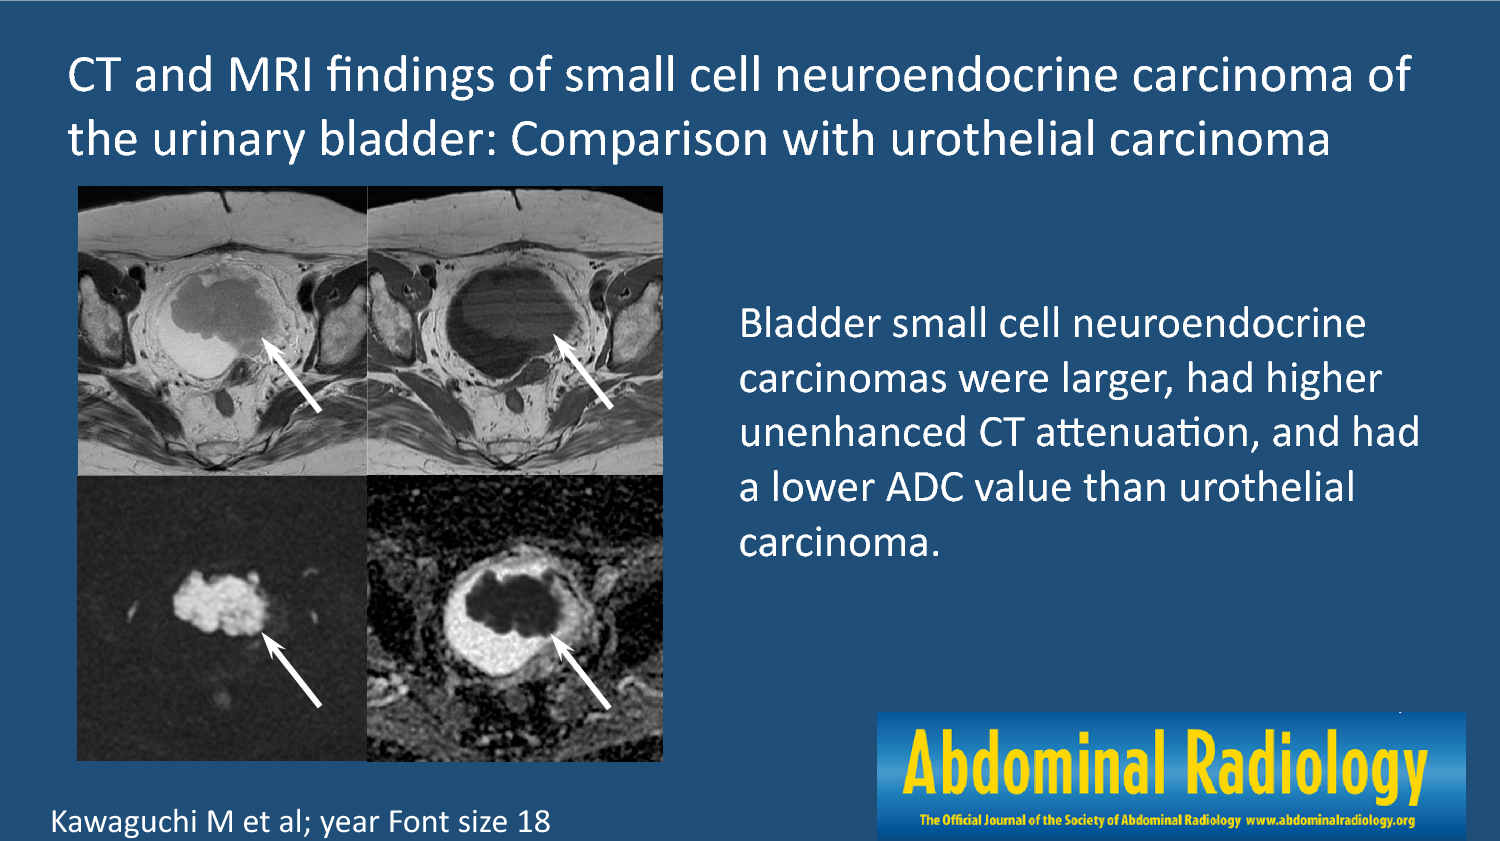 CT and MRI findings of small cell neuroendocrine carcinoma of the urinary bladder: comparison with urothelial carcinoma